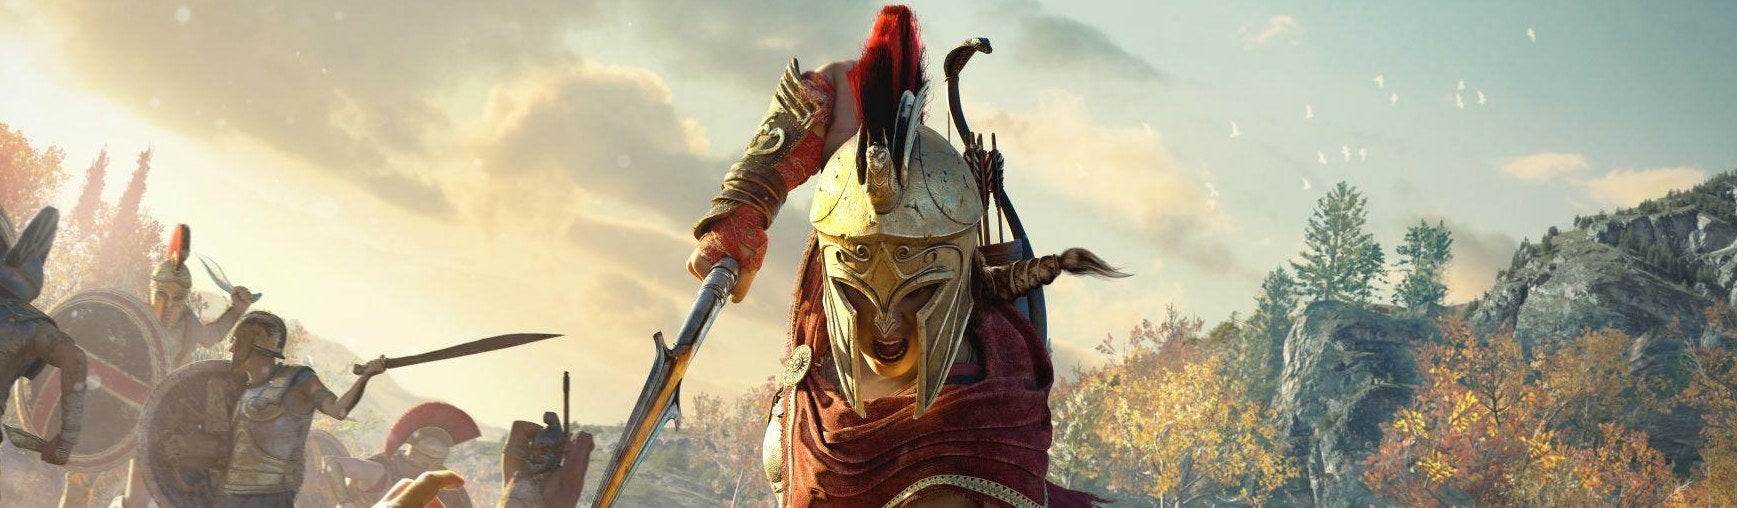 Assassin's Creed Odyssey Walkthrough and Guides VG247